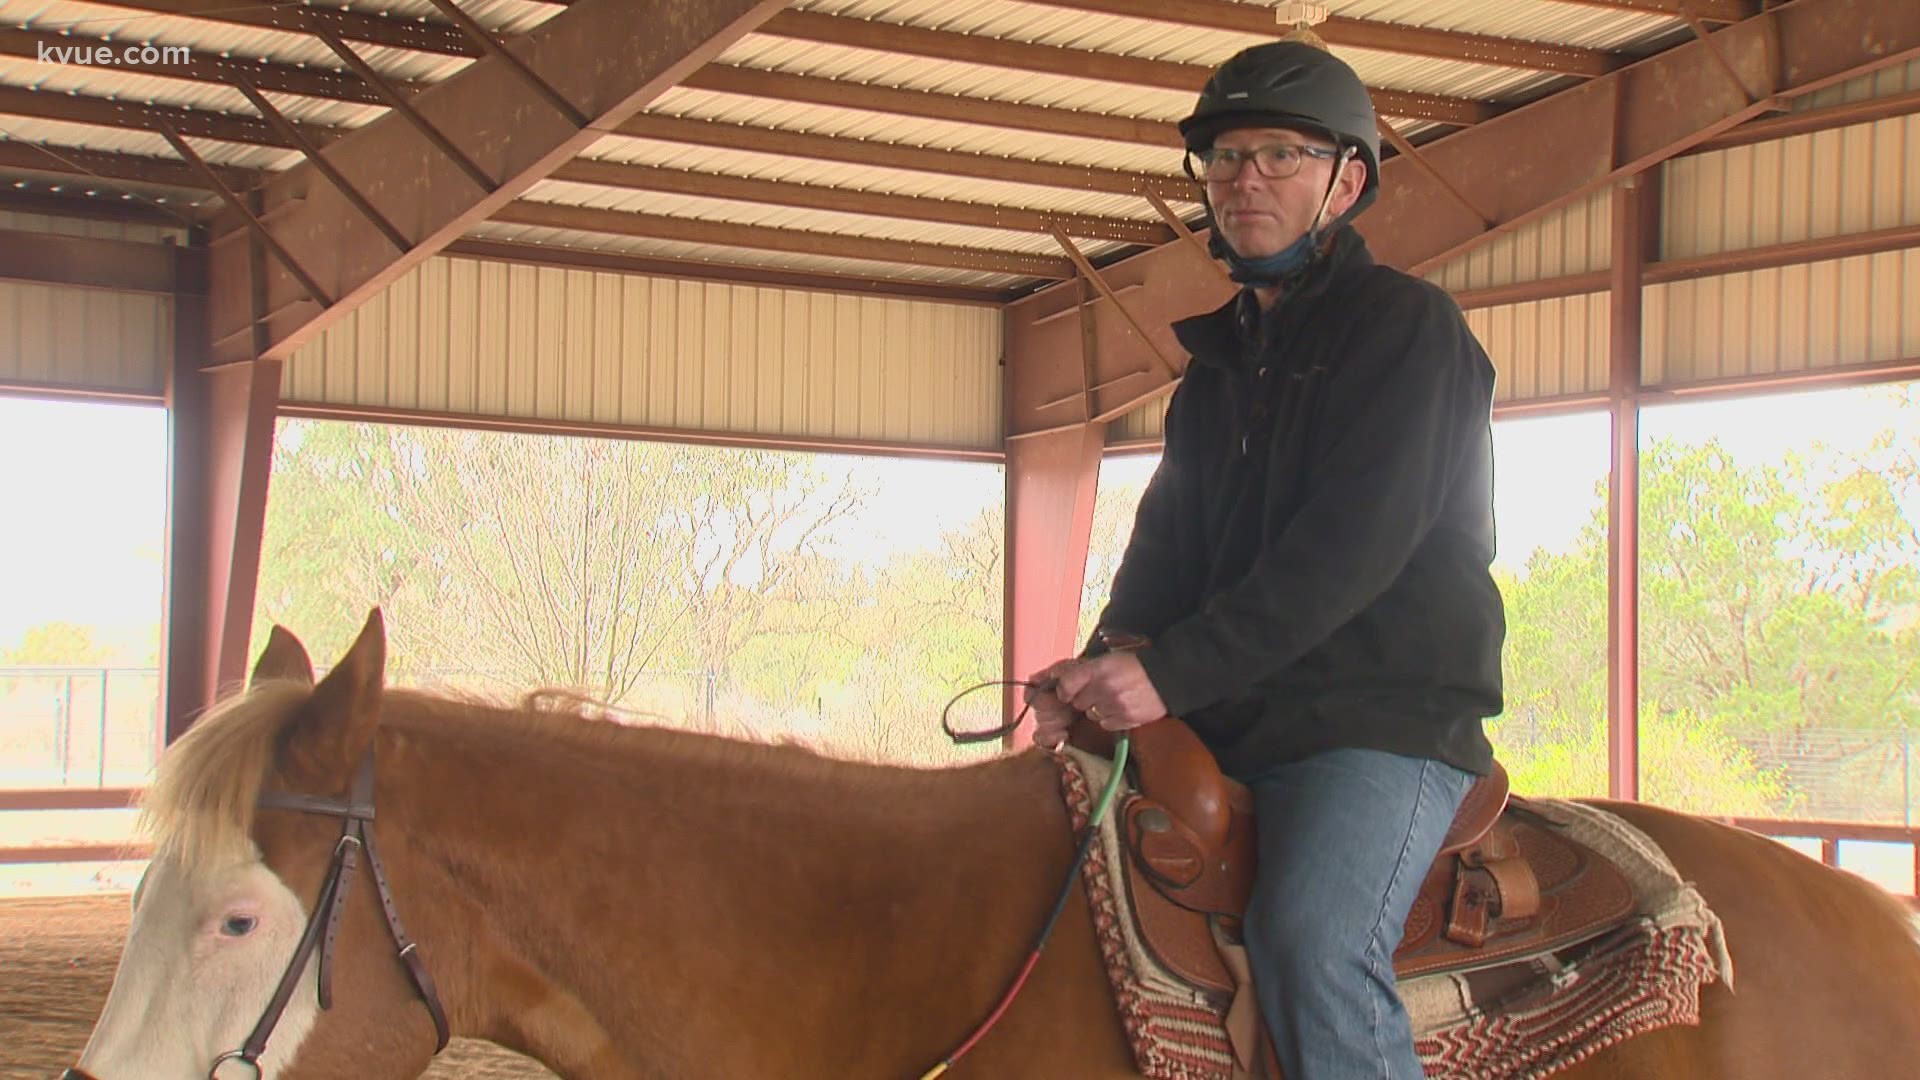 The HARTH Foundation in Burnet, Texas, is using horse therapy to provide peace to riders. Many veterans have found stress relief through the foundation.